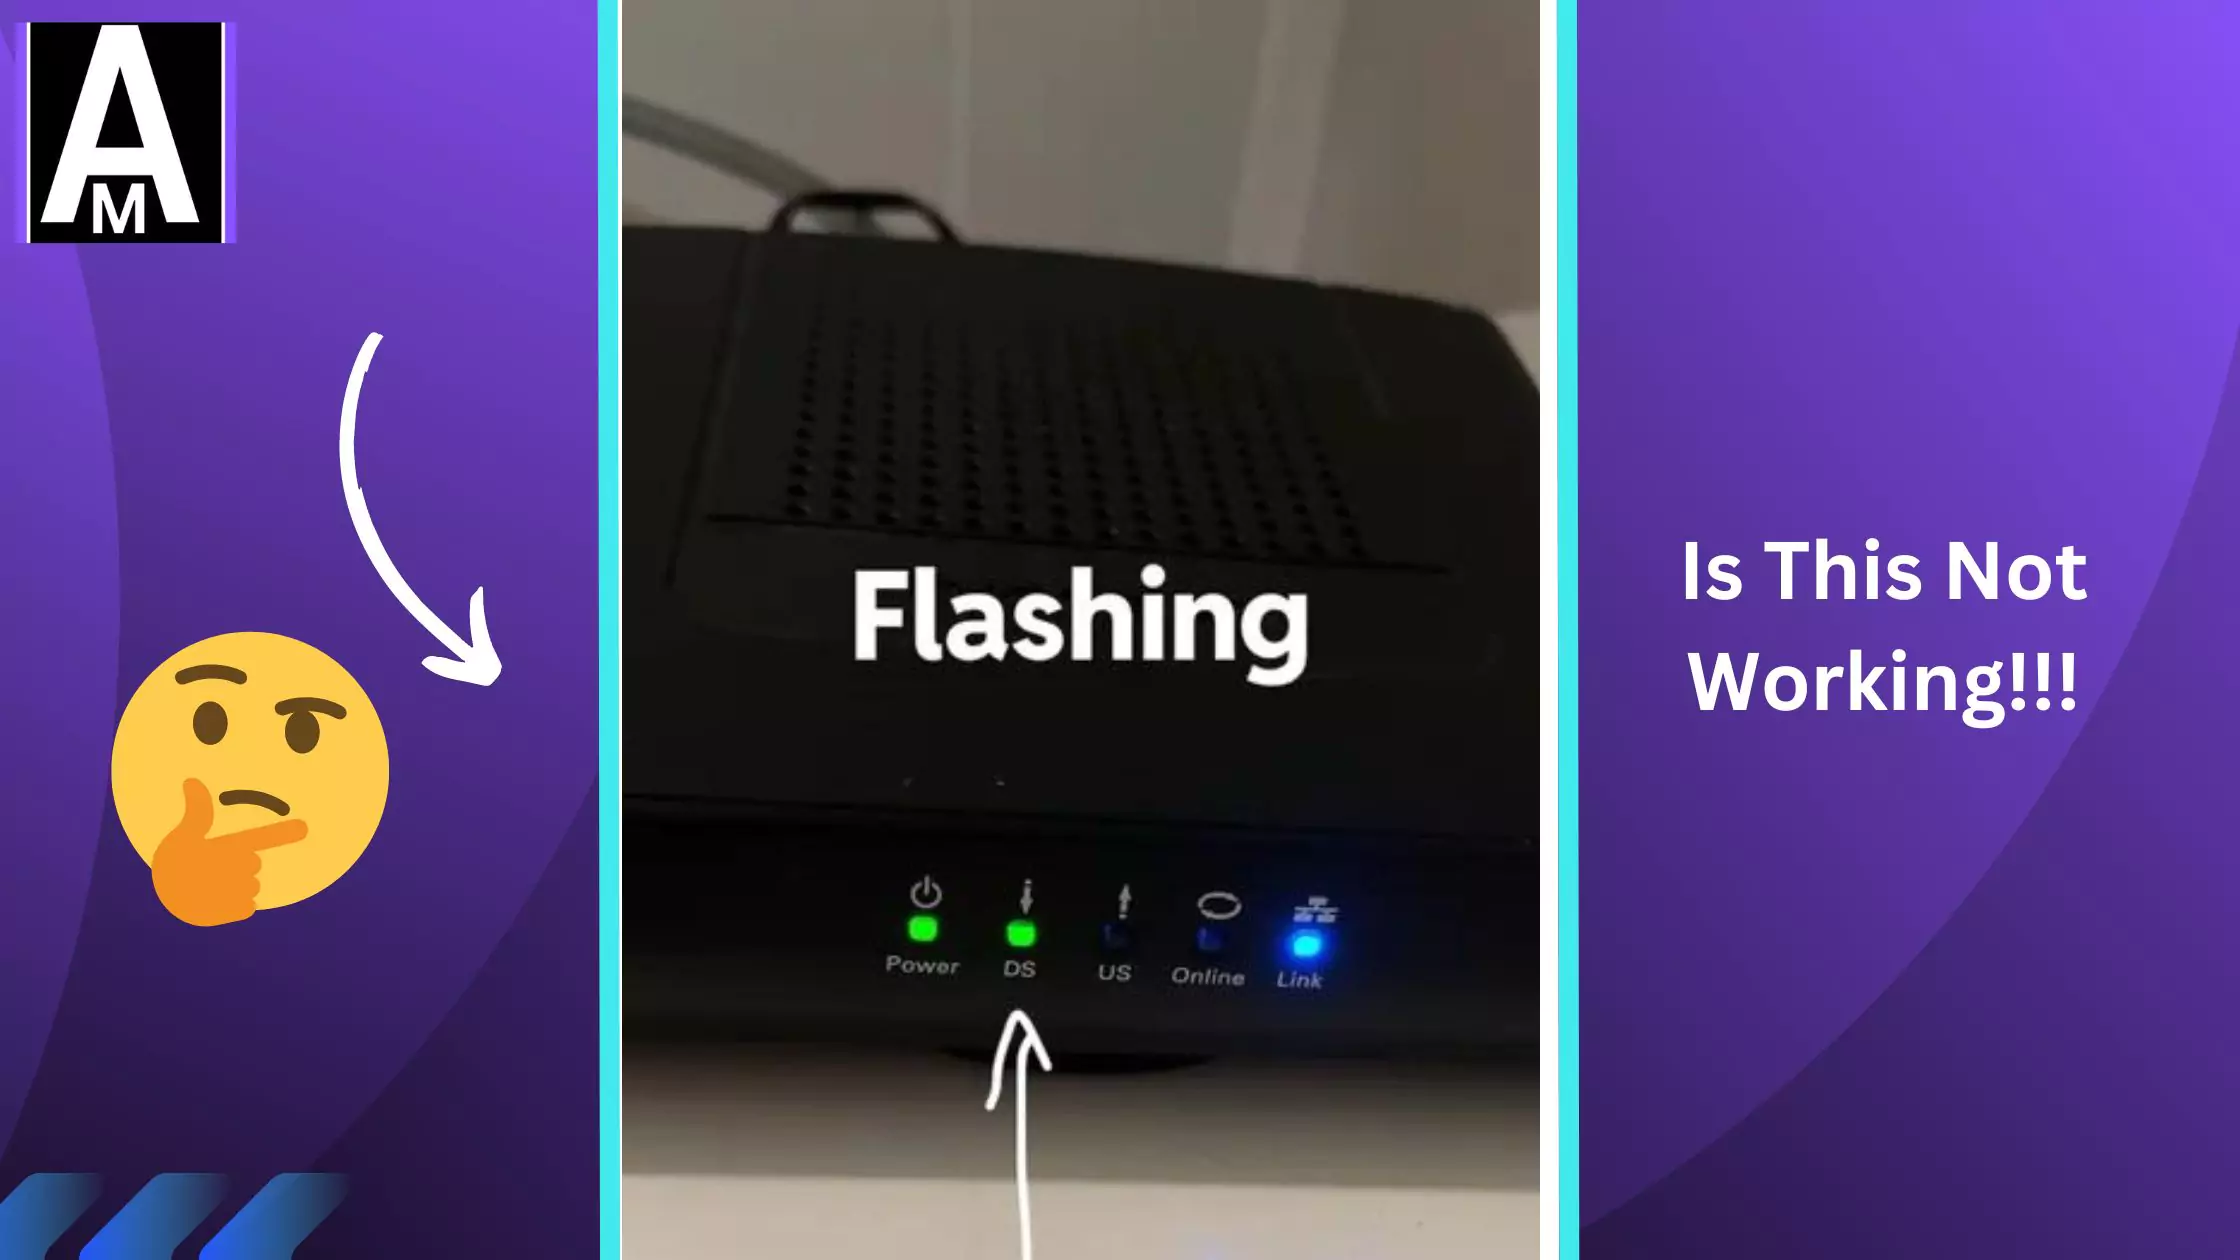 flashing router which is not working image with thinking emojis and overlay text